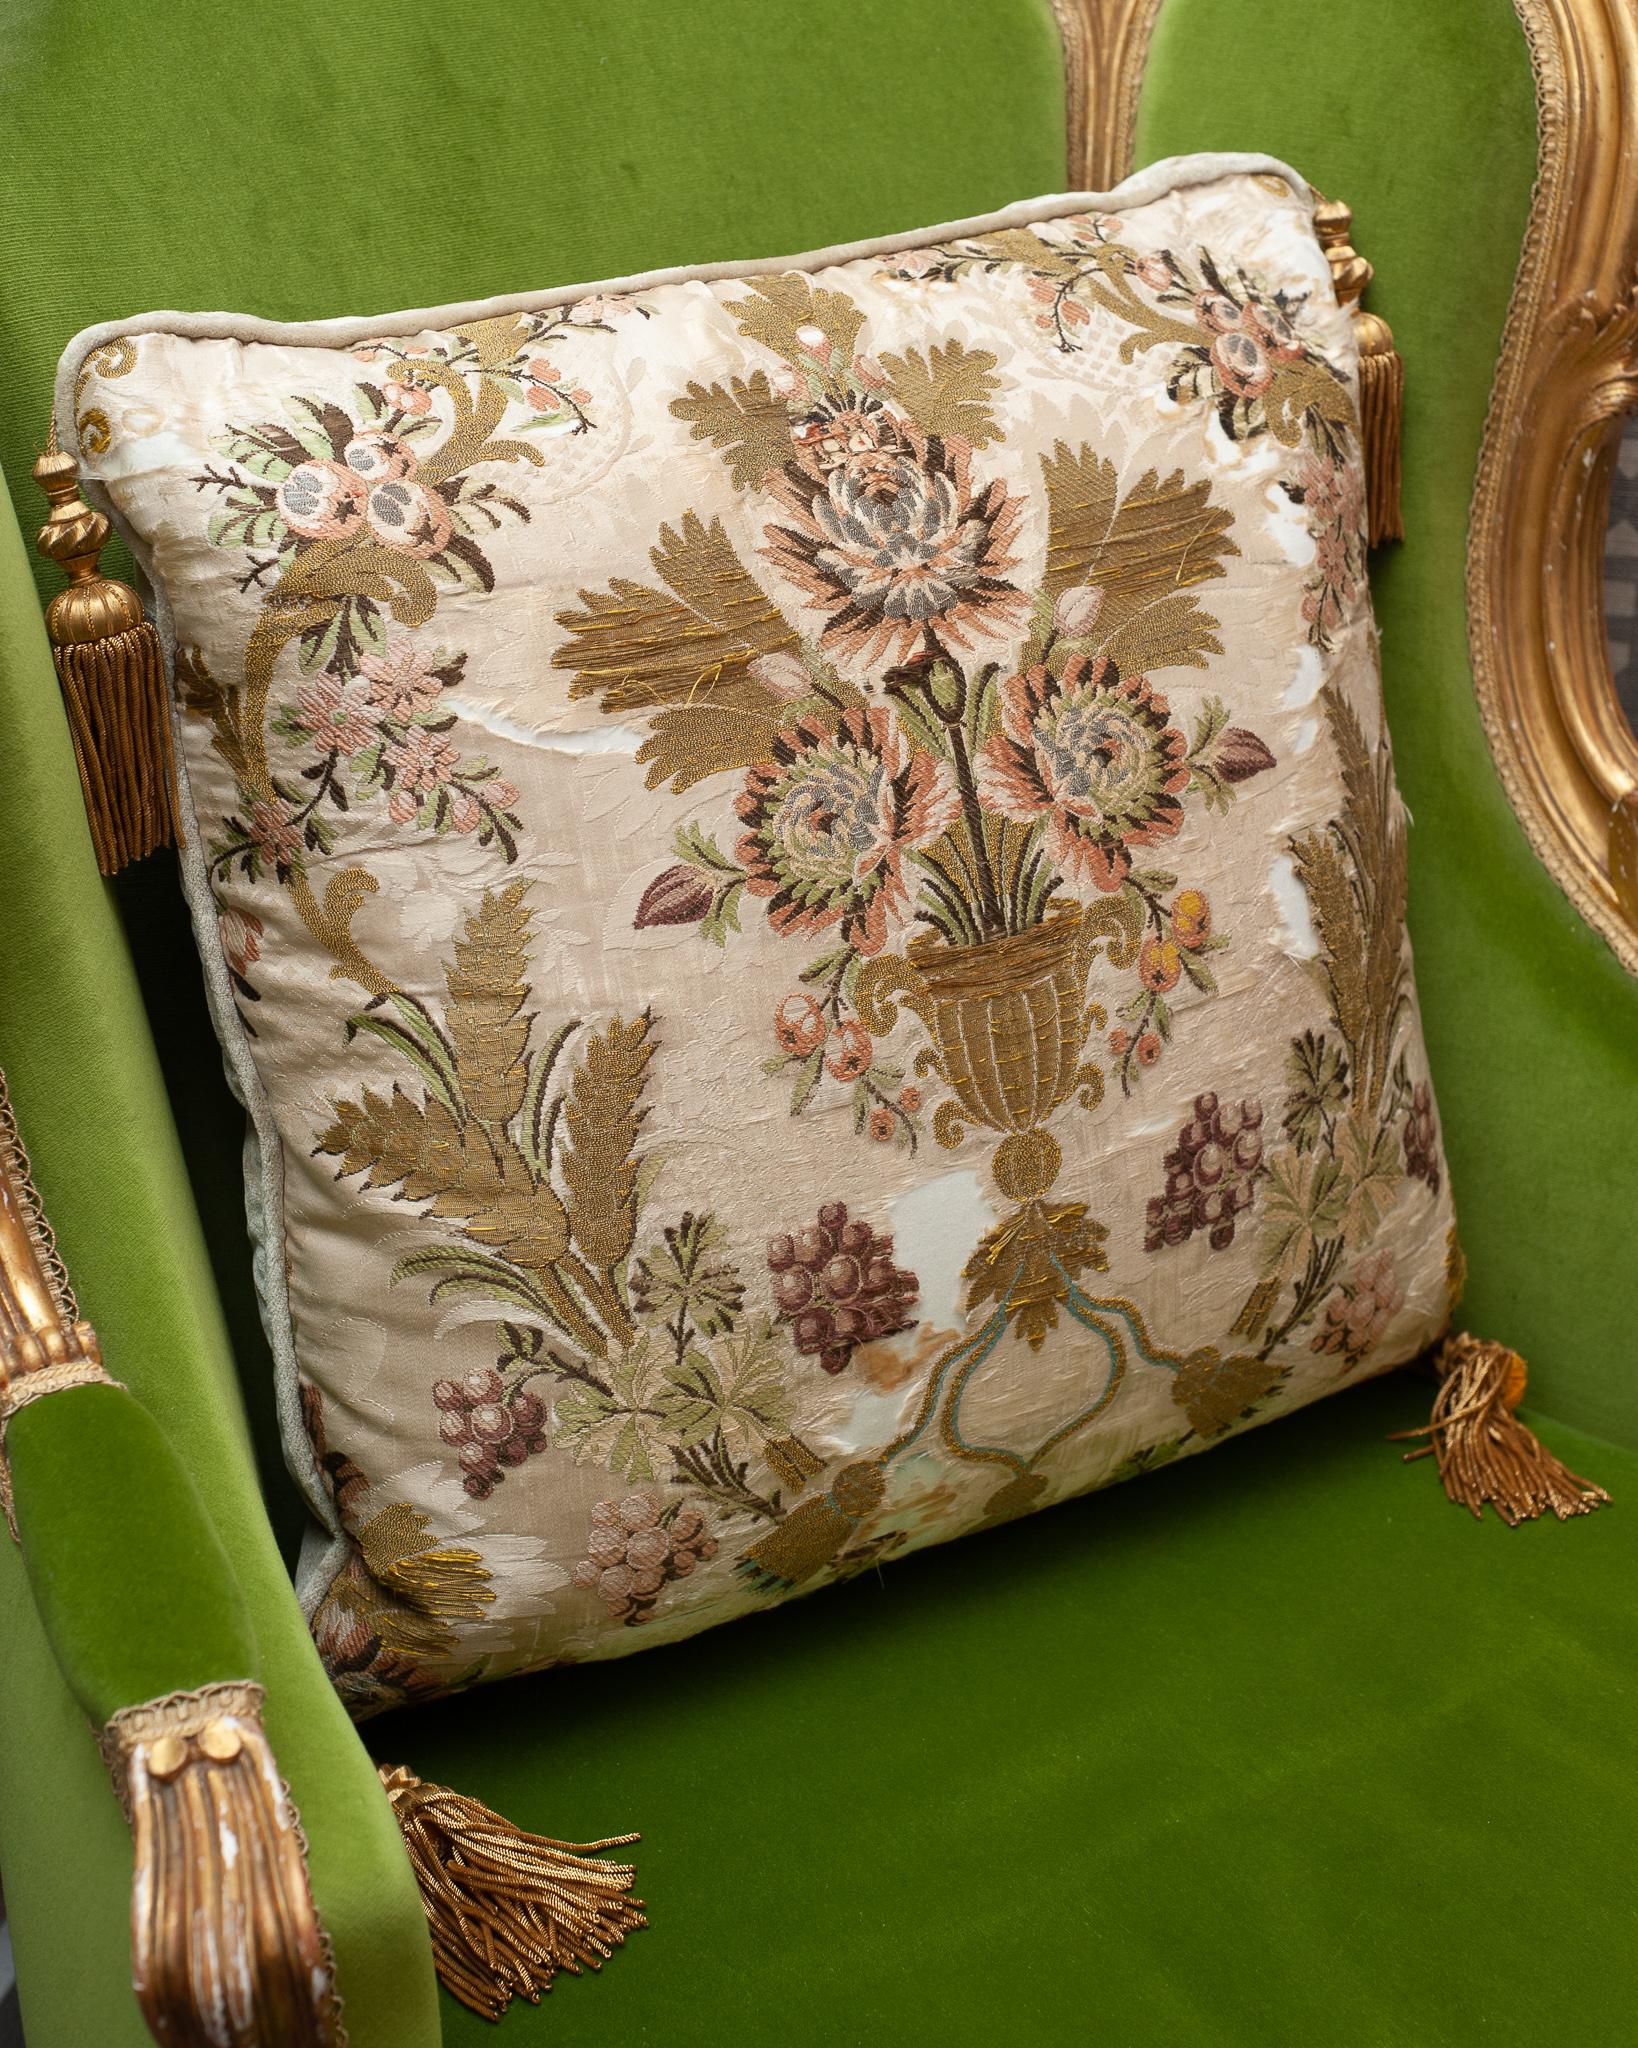 Canadian Cream Silk Pillow with Antique Embroidered Textile Panel and Metallic Tassels For Sale